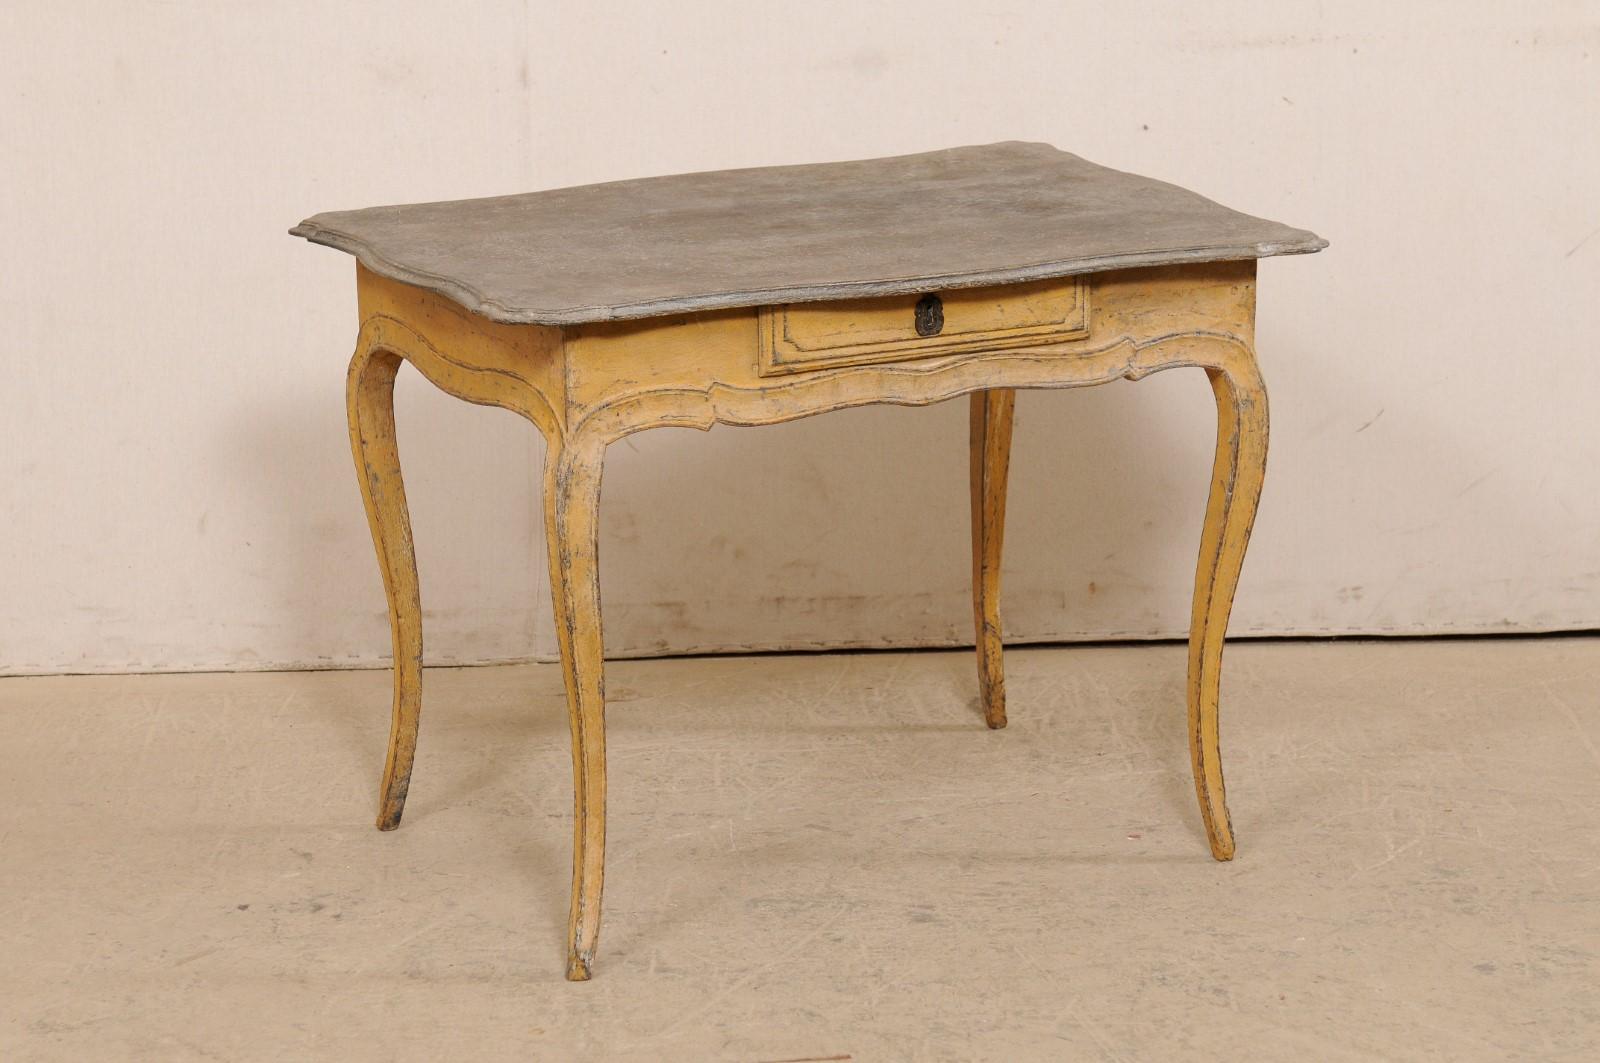 A French smaller-sized painted wood table, with single drawer, from the turn of the 18th and 19th century. This antique table from France features a rectangular-shaped top with lovely scalloped edging, which overhangs the scalloped apron that houses